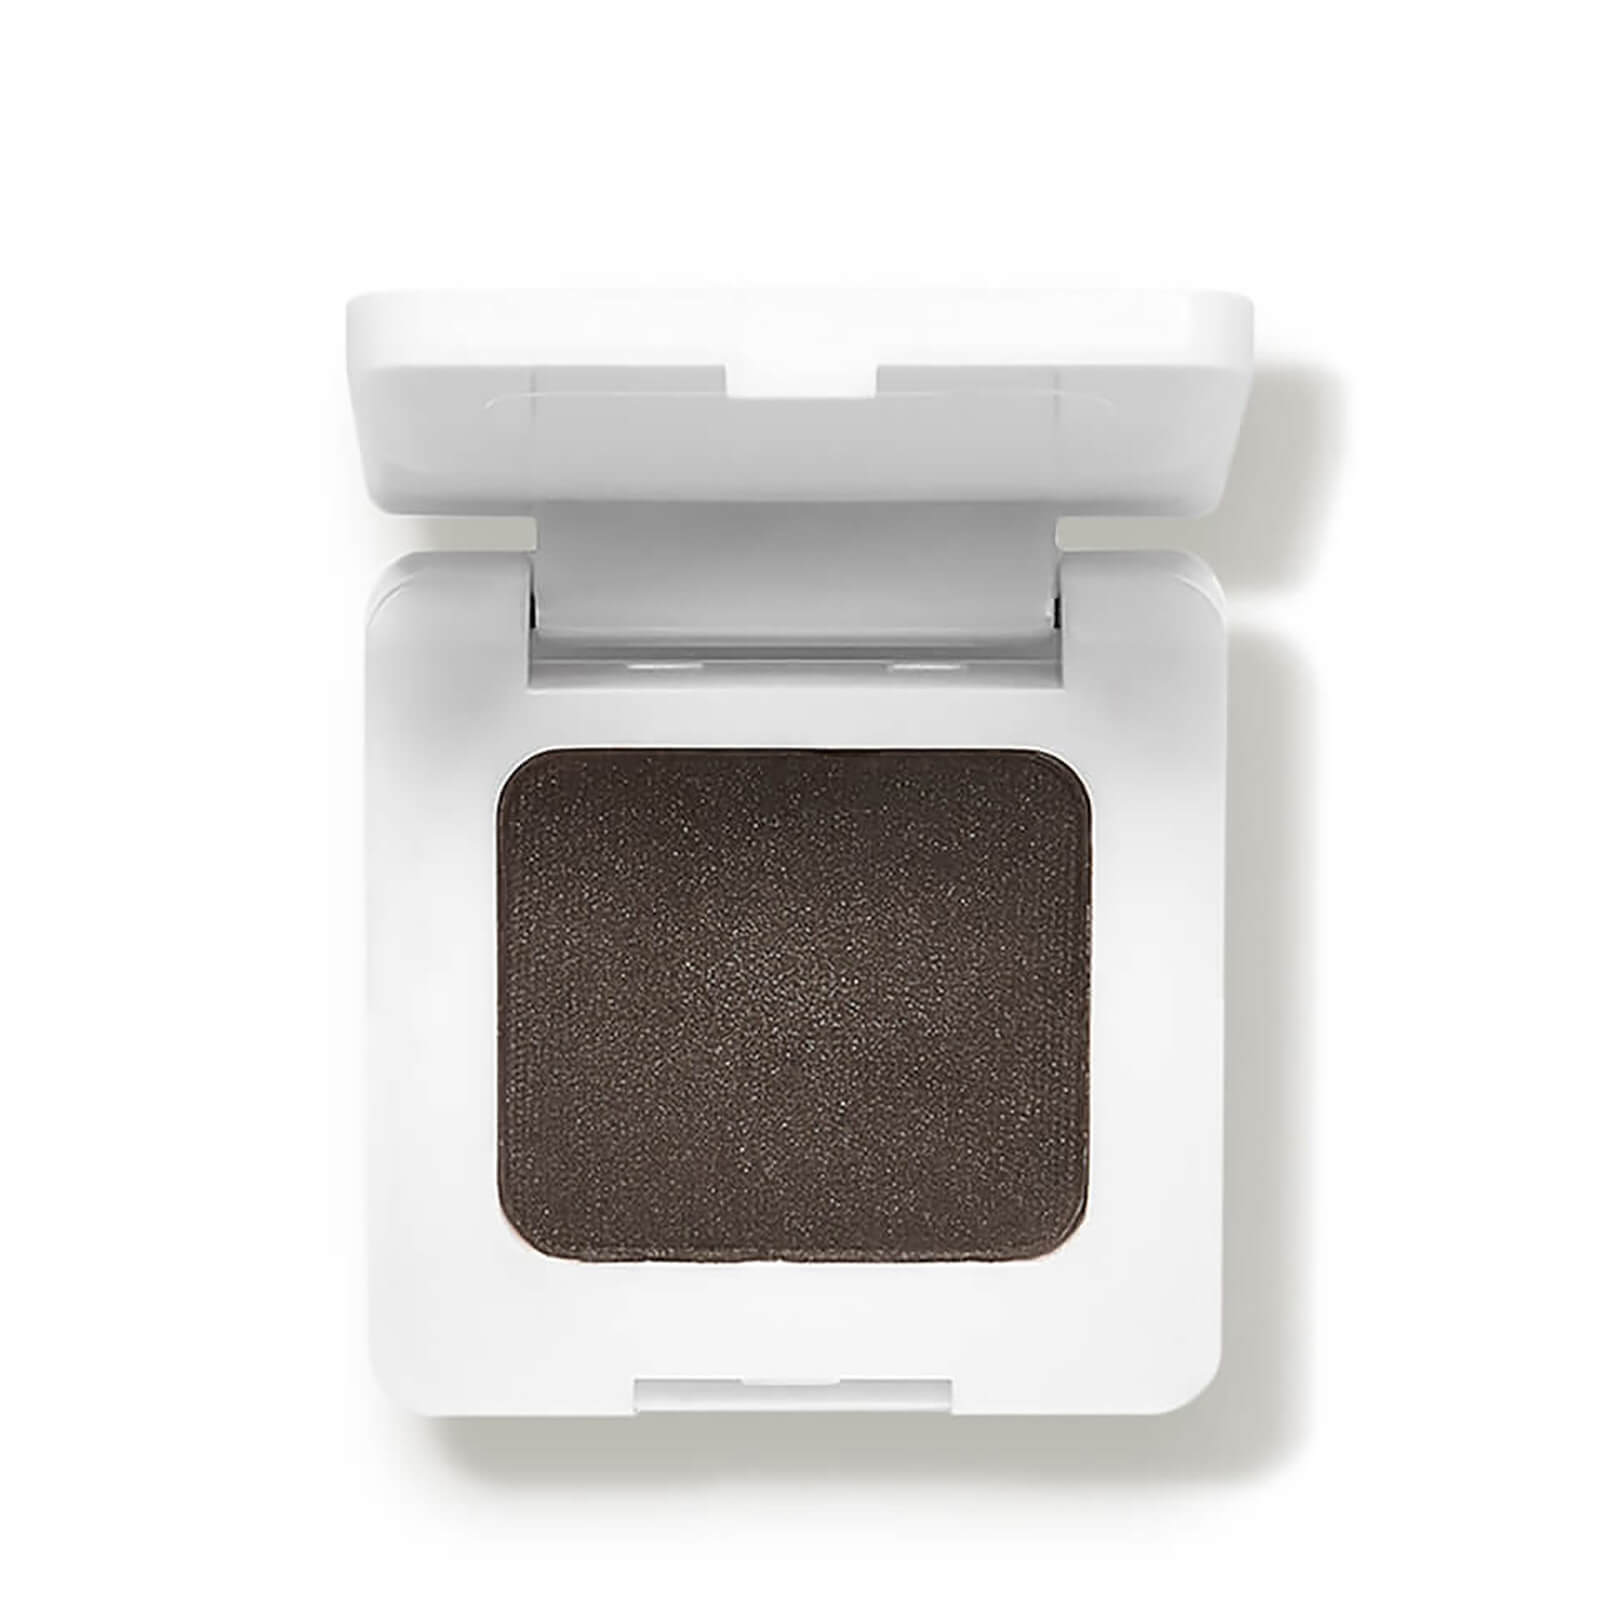 RMS Beauty Back2Brow Powder 3.5g (Various Shades) - Dark von RMS Beauty